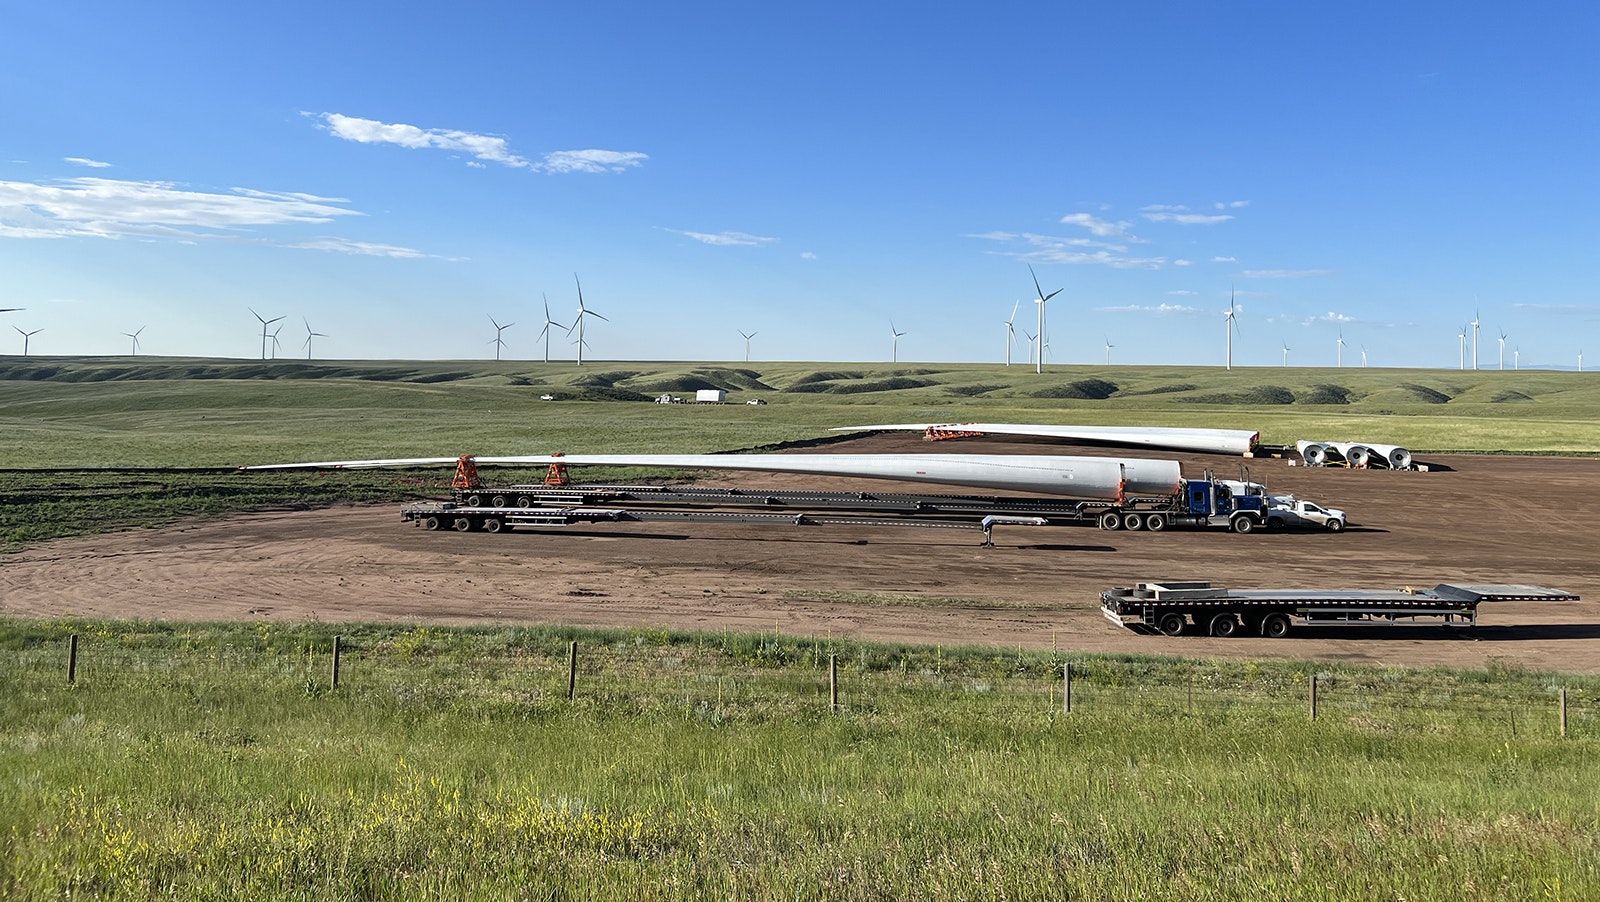 With a wind farm in the background, a staging area for new turbines is sited along Interstate 80 between Cheyenne and Laramie this summer.